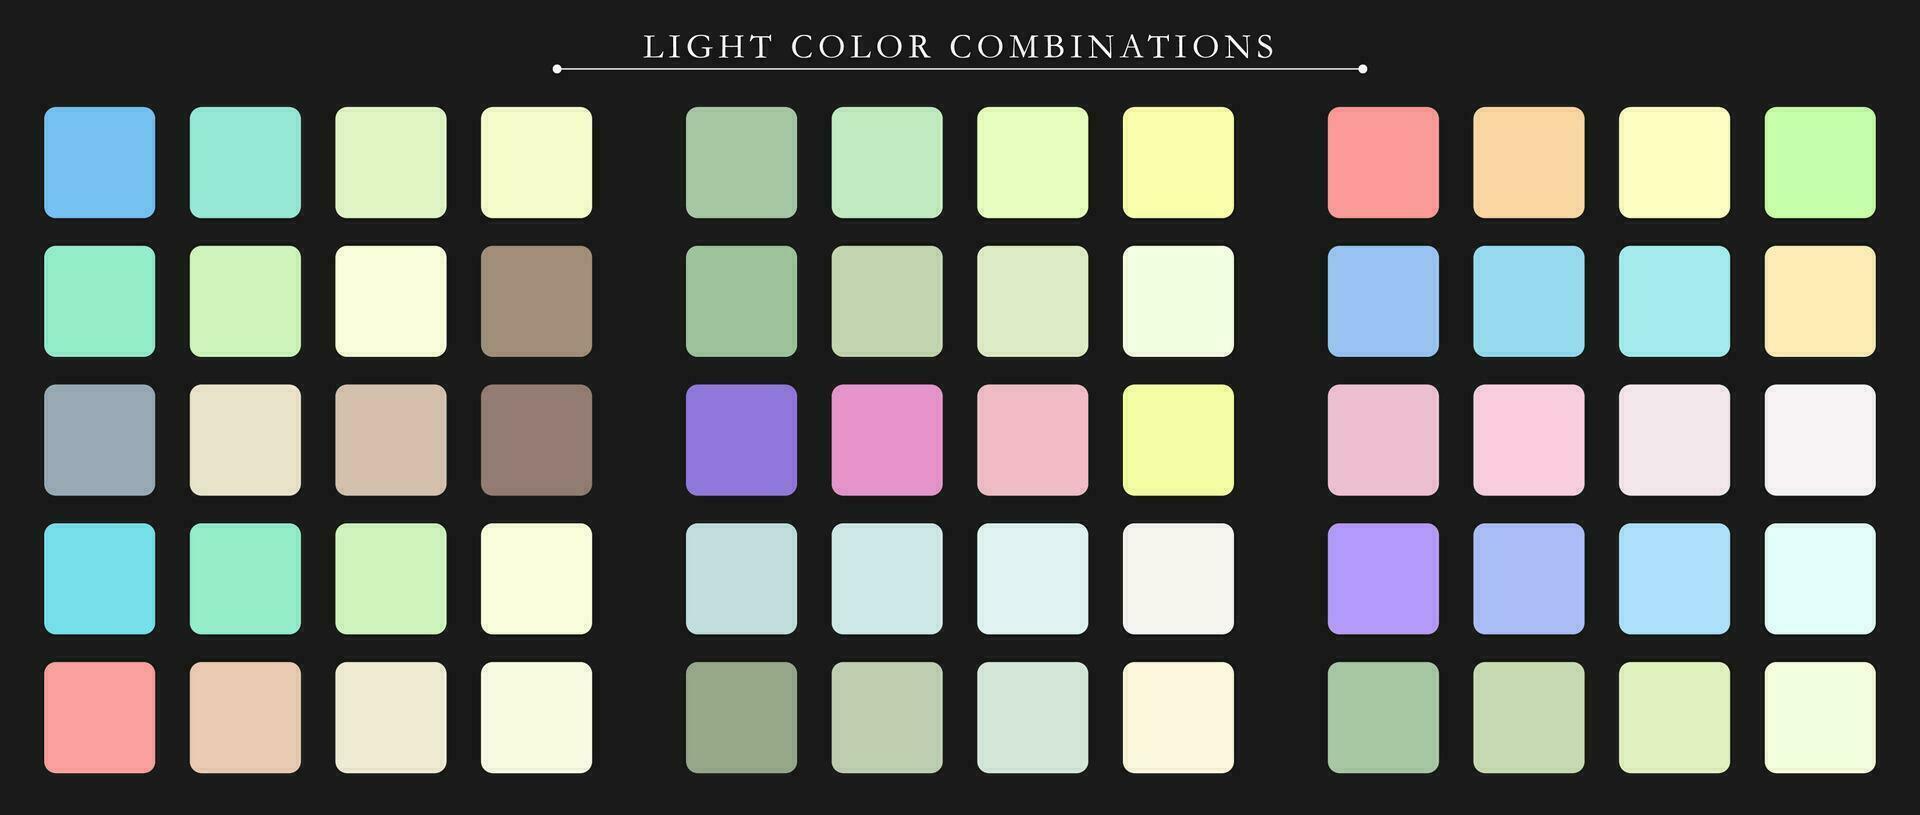 Light palette. Trend color pallete guide template. An example of a color palette. Forecast of the future color trend. Match color combinations. Vector graphics. Eps 10.